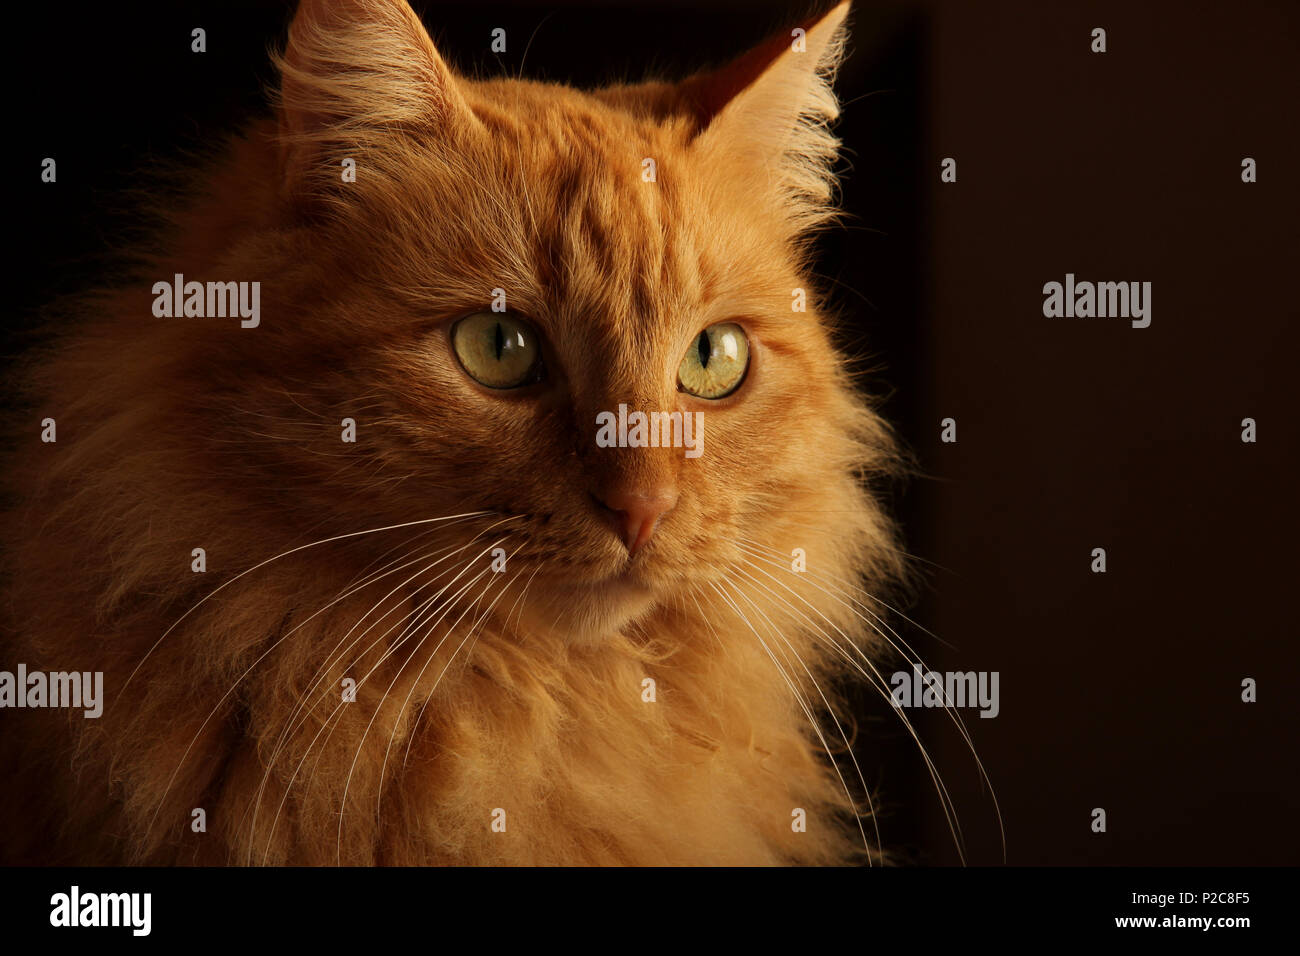 portrait of a longhaired ginger cat Stock Photo